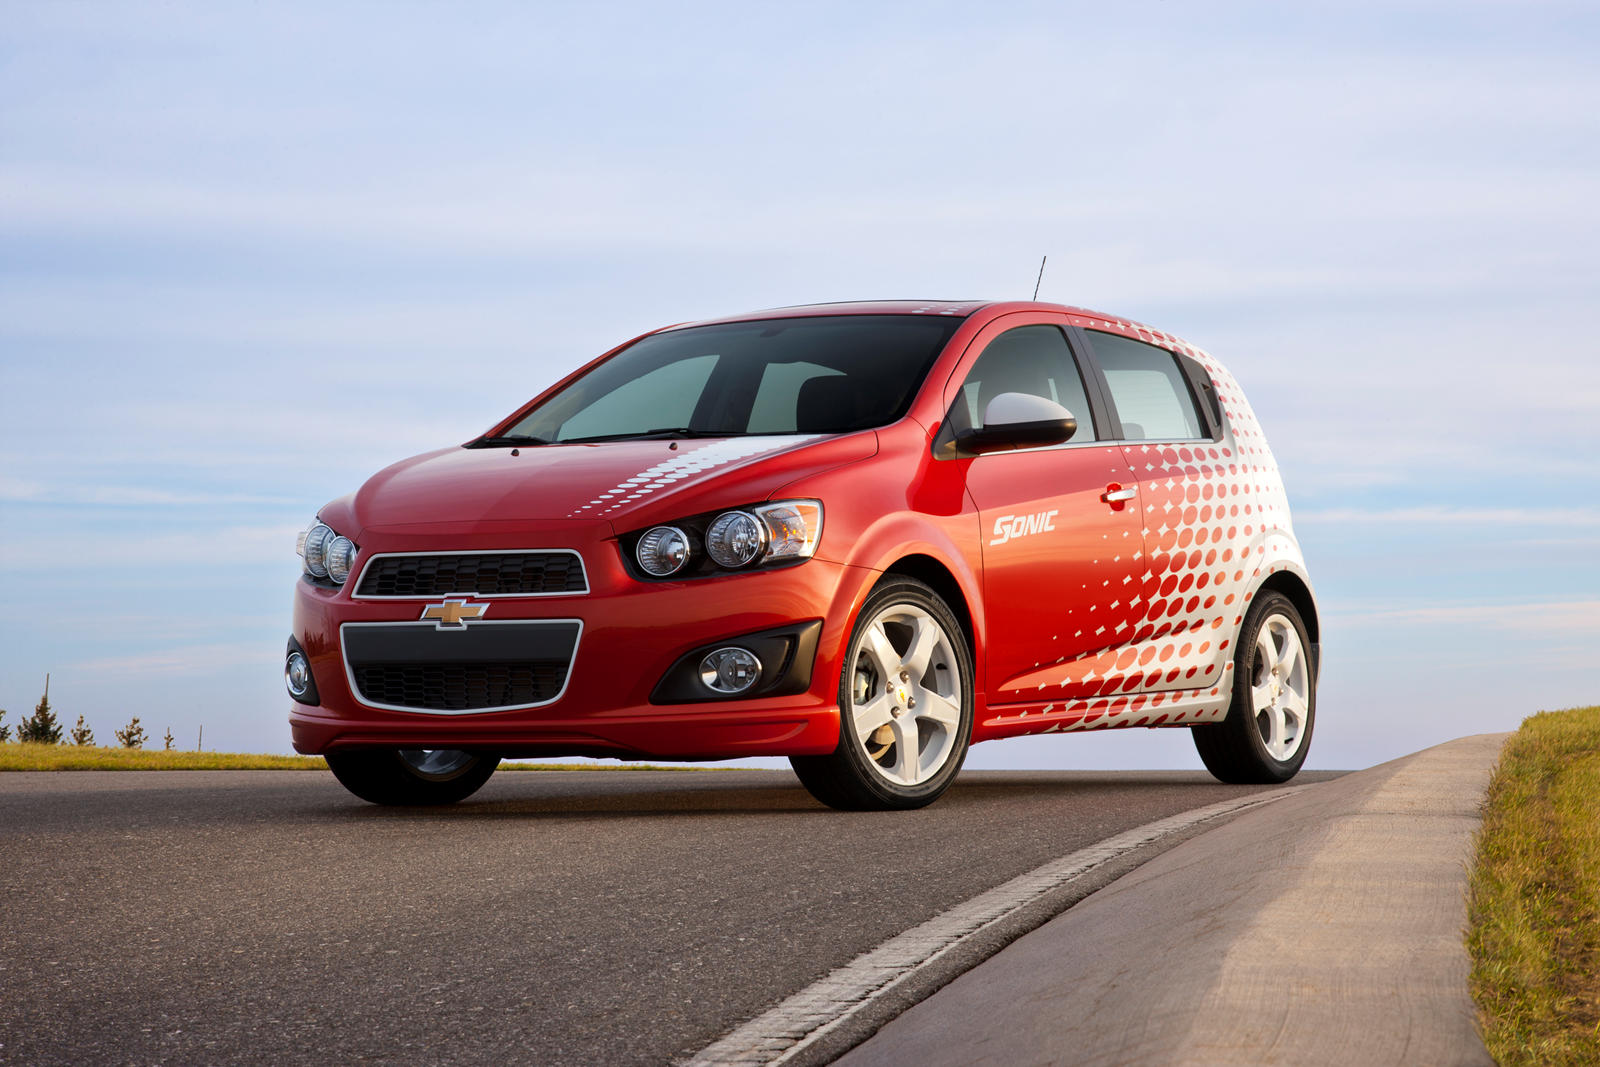 2015 Chevrolet Sonic Hatchback Front Angle View